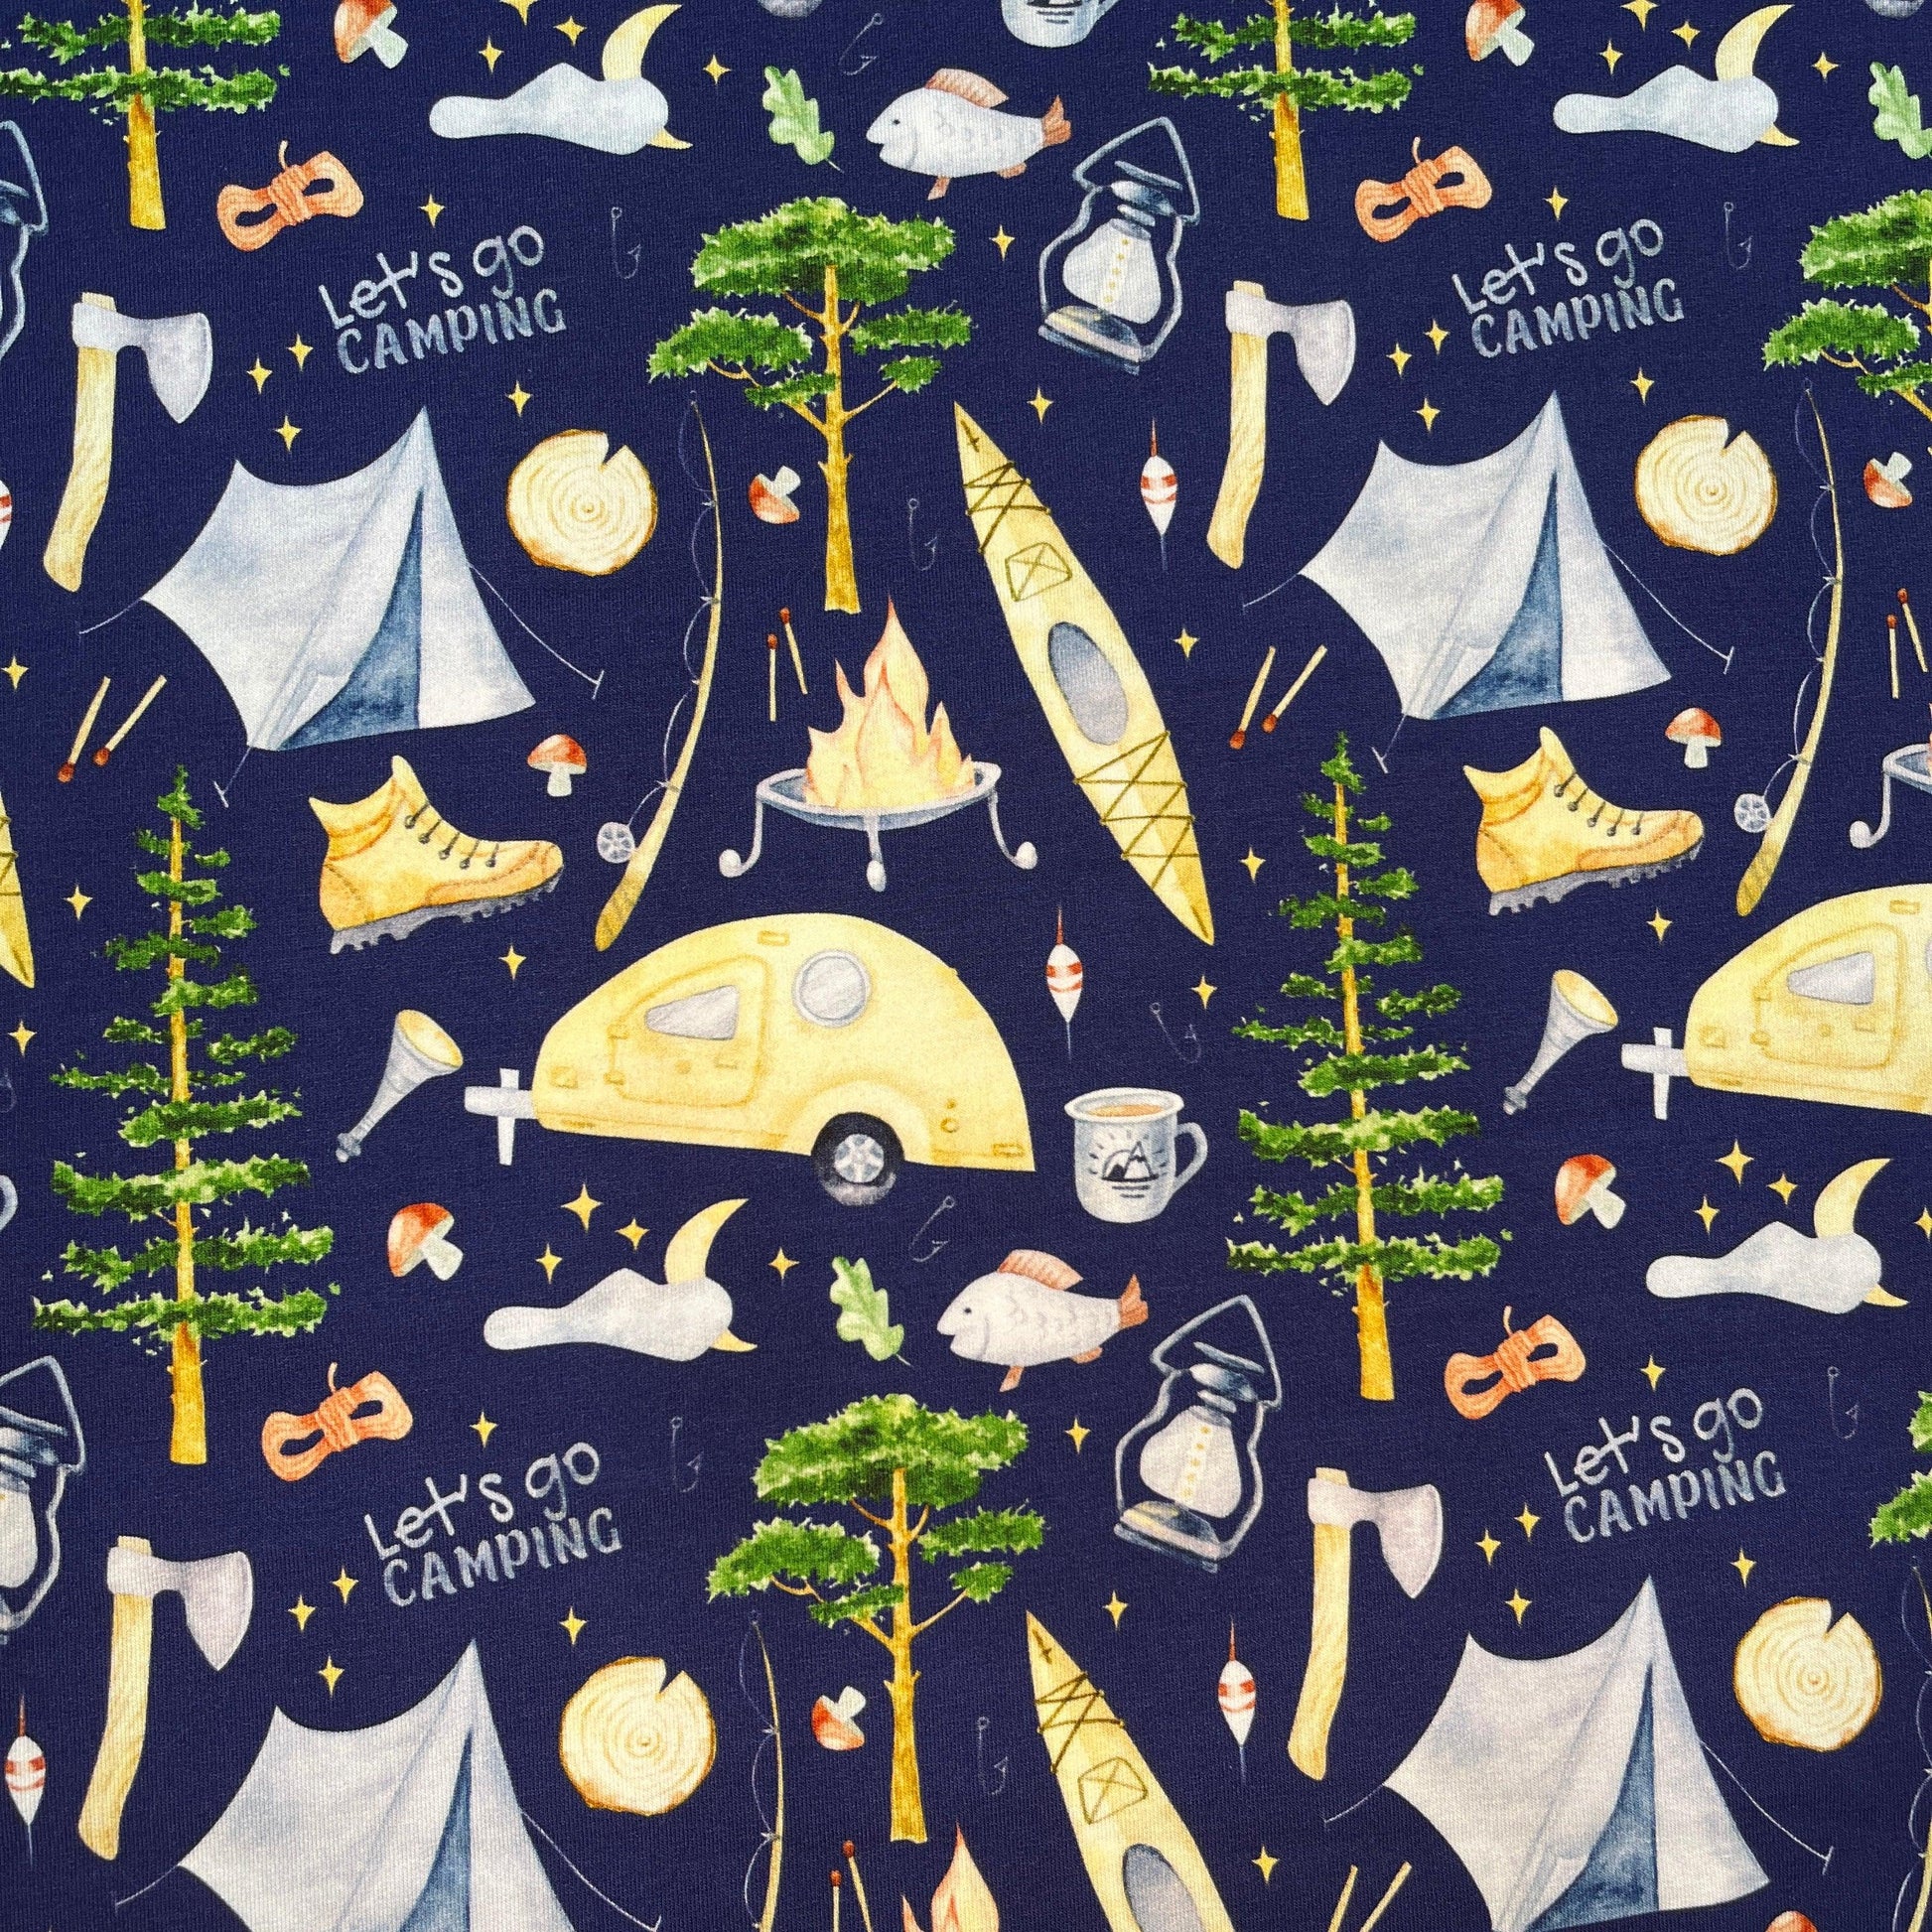 Let's Go Camping on Bamboo/Spandex Jersey Fabric - Nature's Fabrics